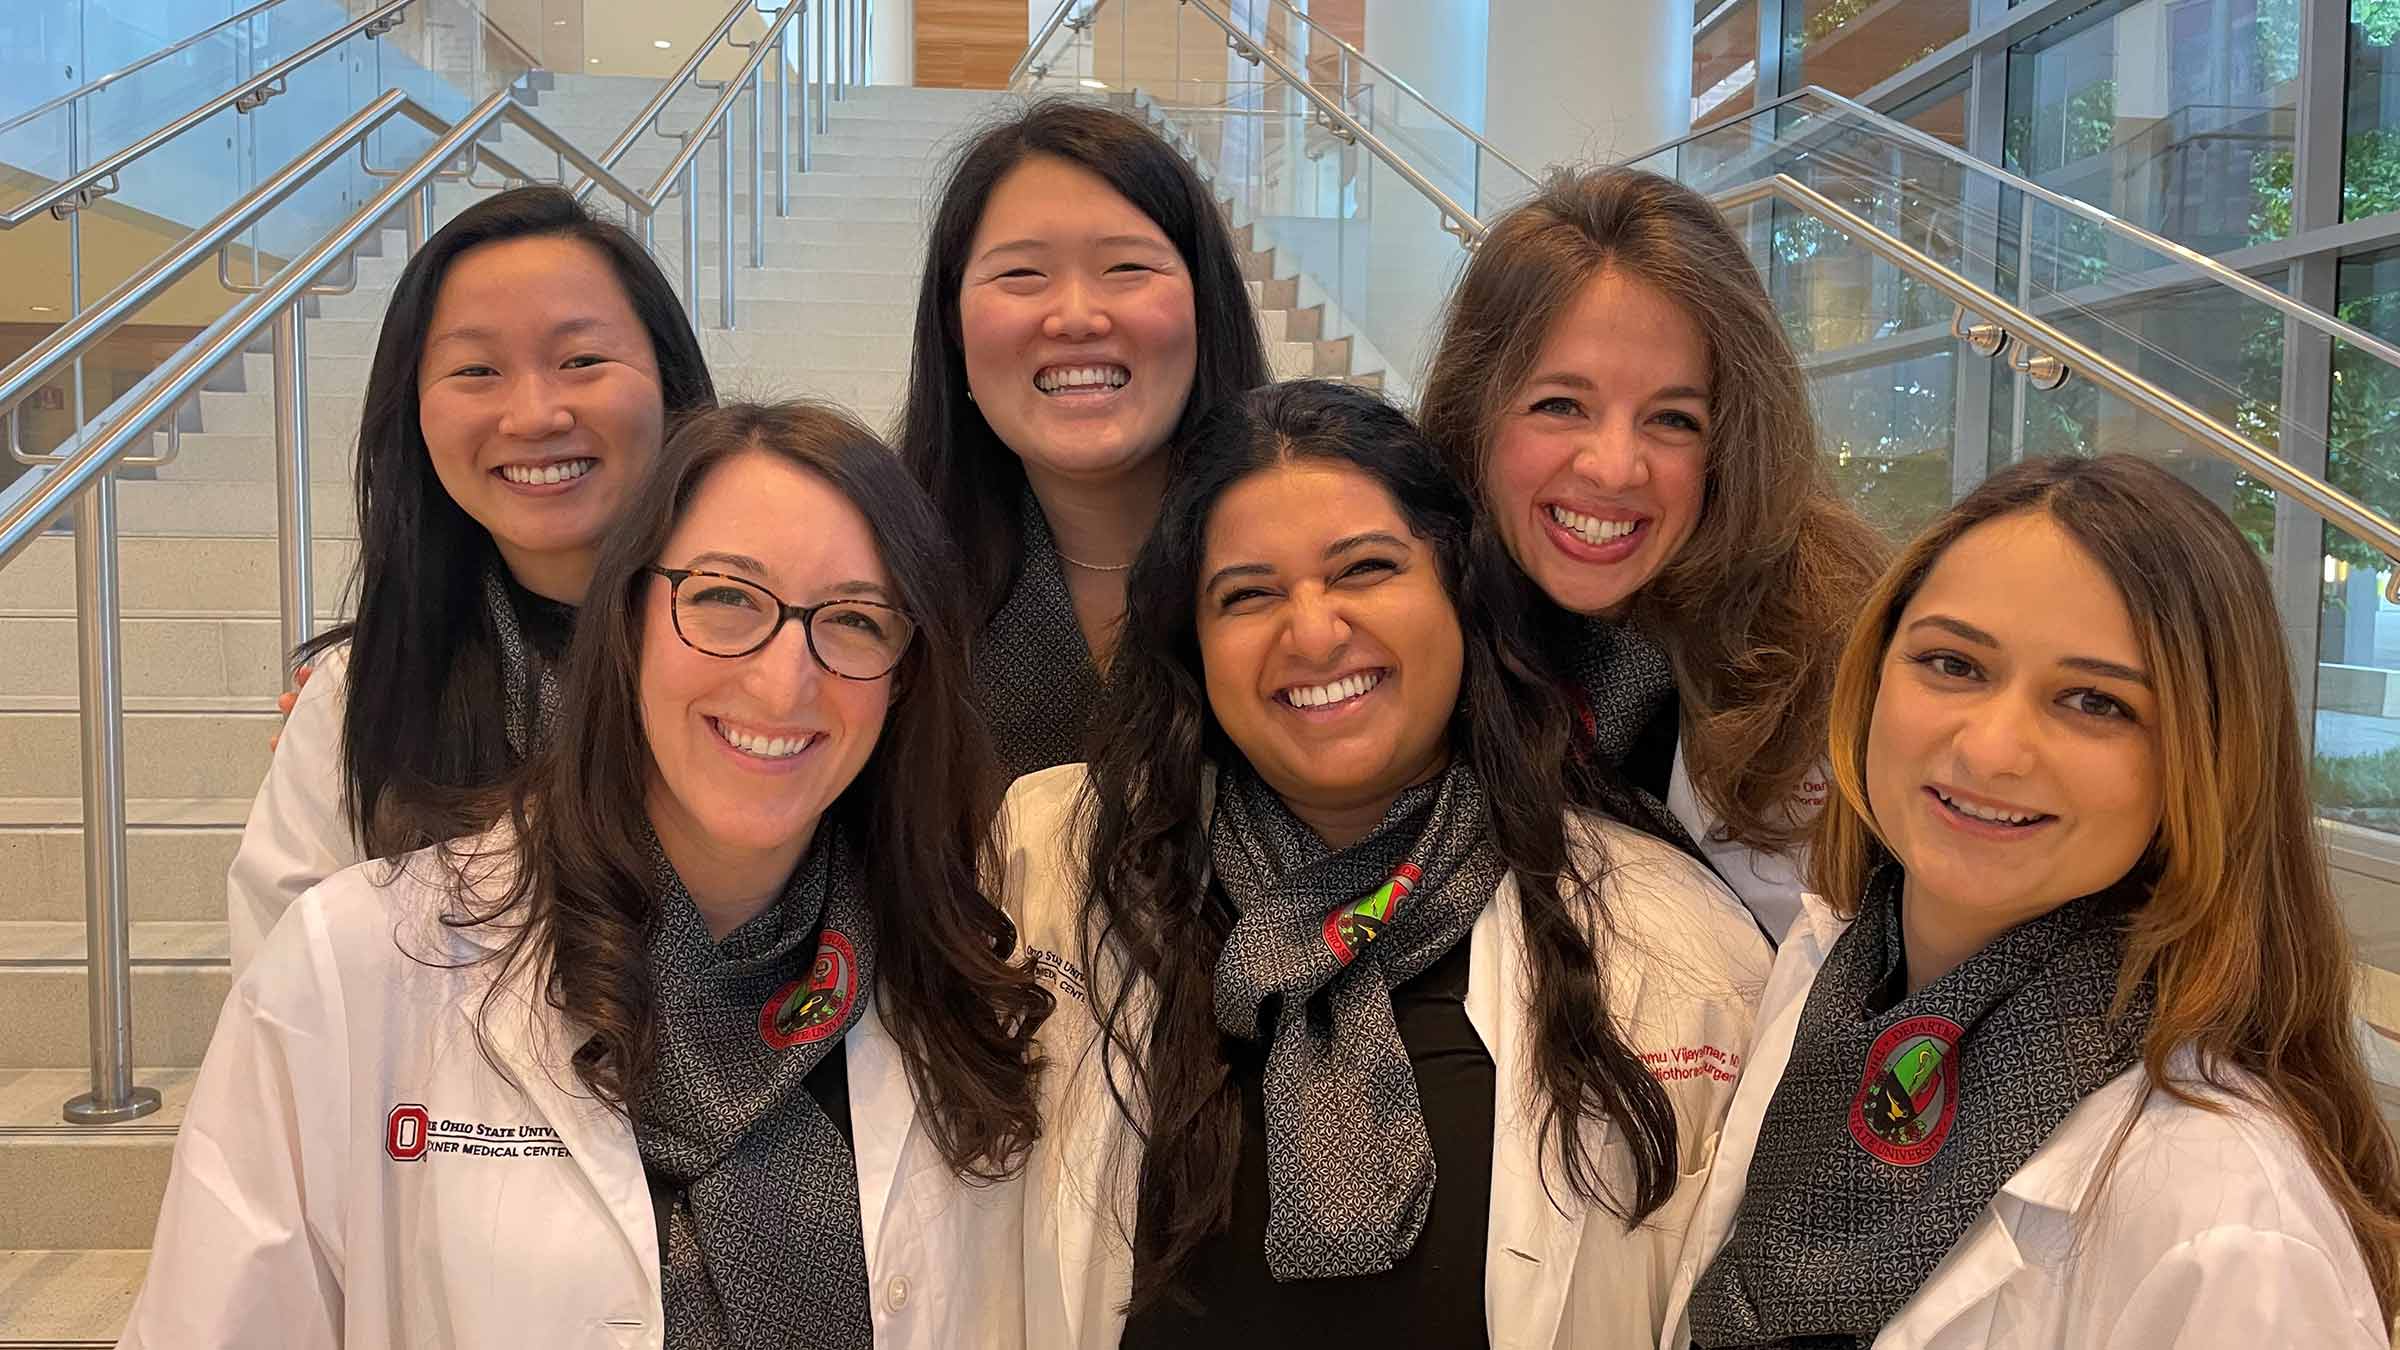 Six female trainees in the cardiothoracic surgery residency program at Ohio State